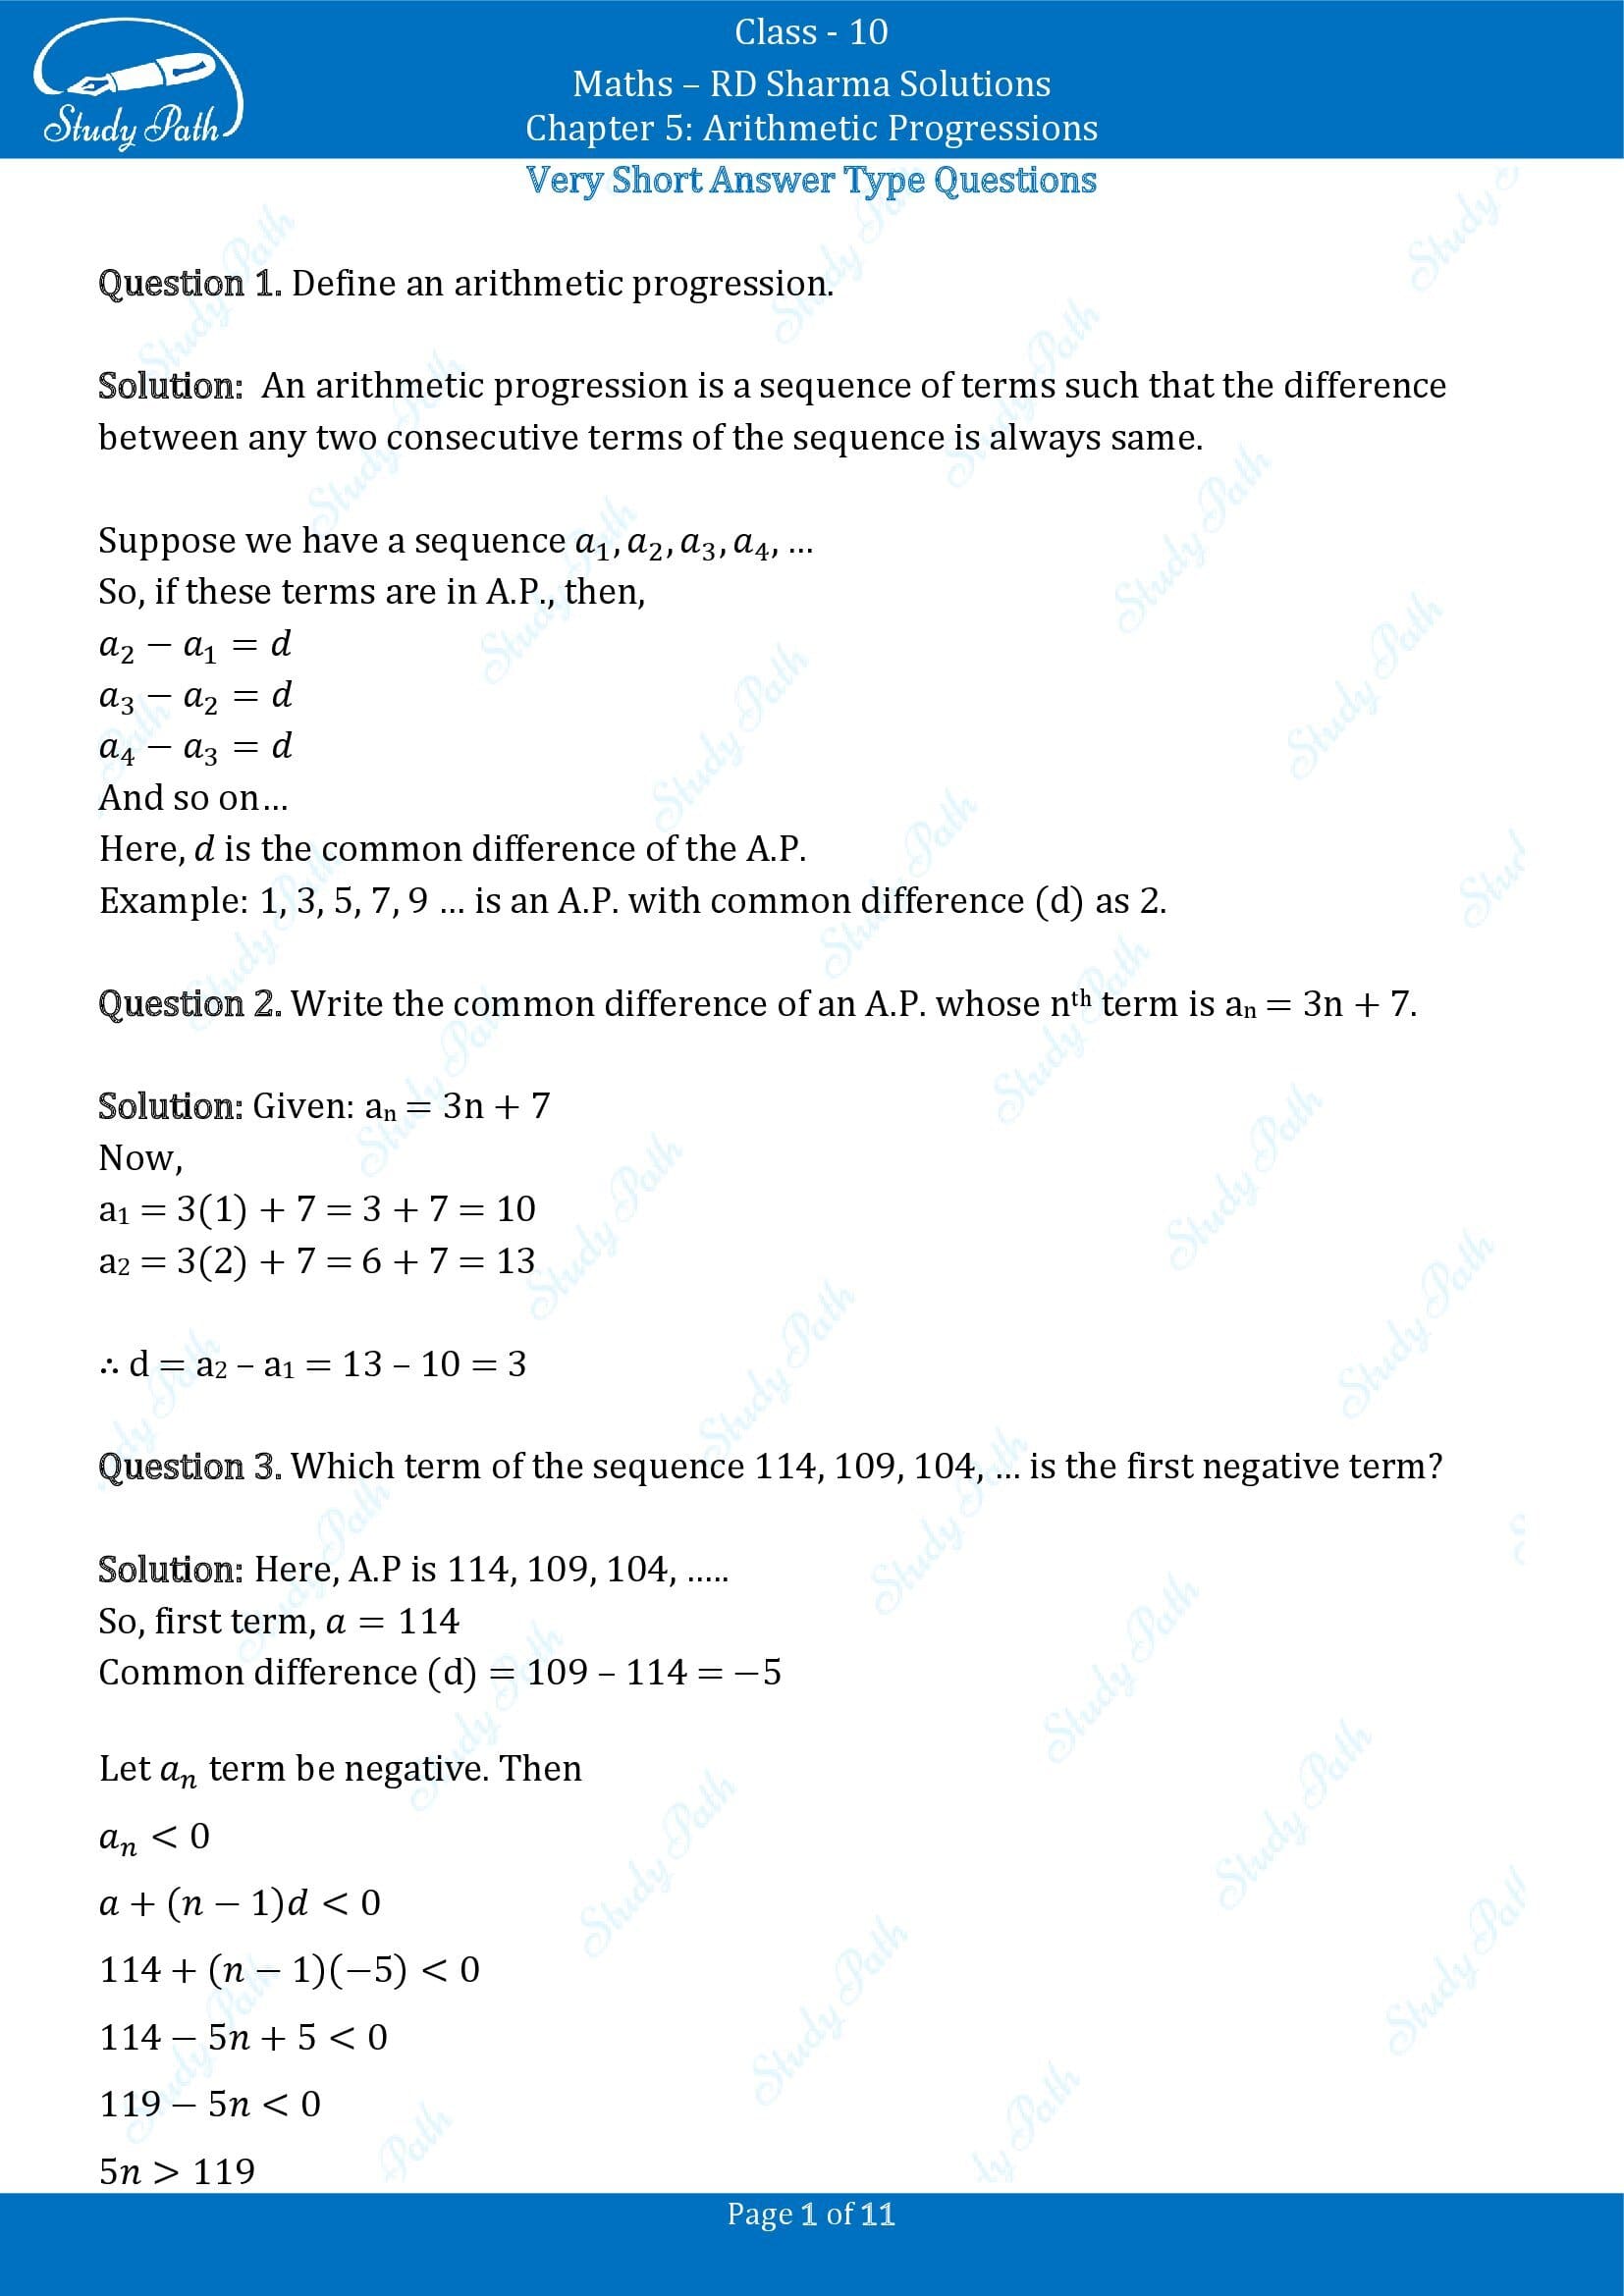 RD Sharma Solutions Class 10 Chapter 5 Arithmetic Progressions Very Short Answer Type Questions VSAQs 00001